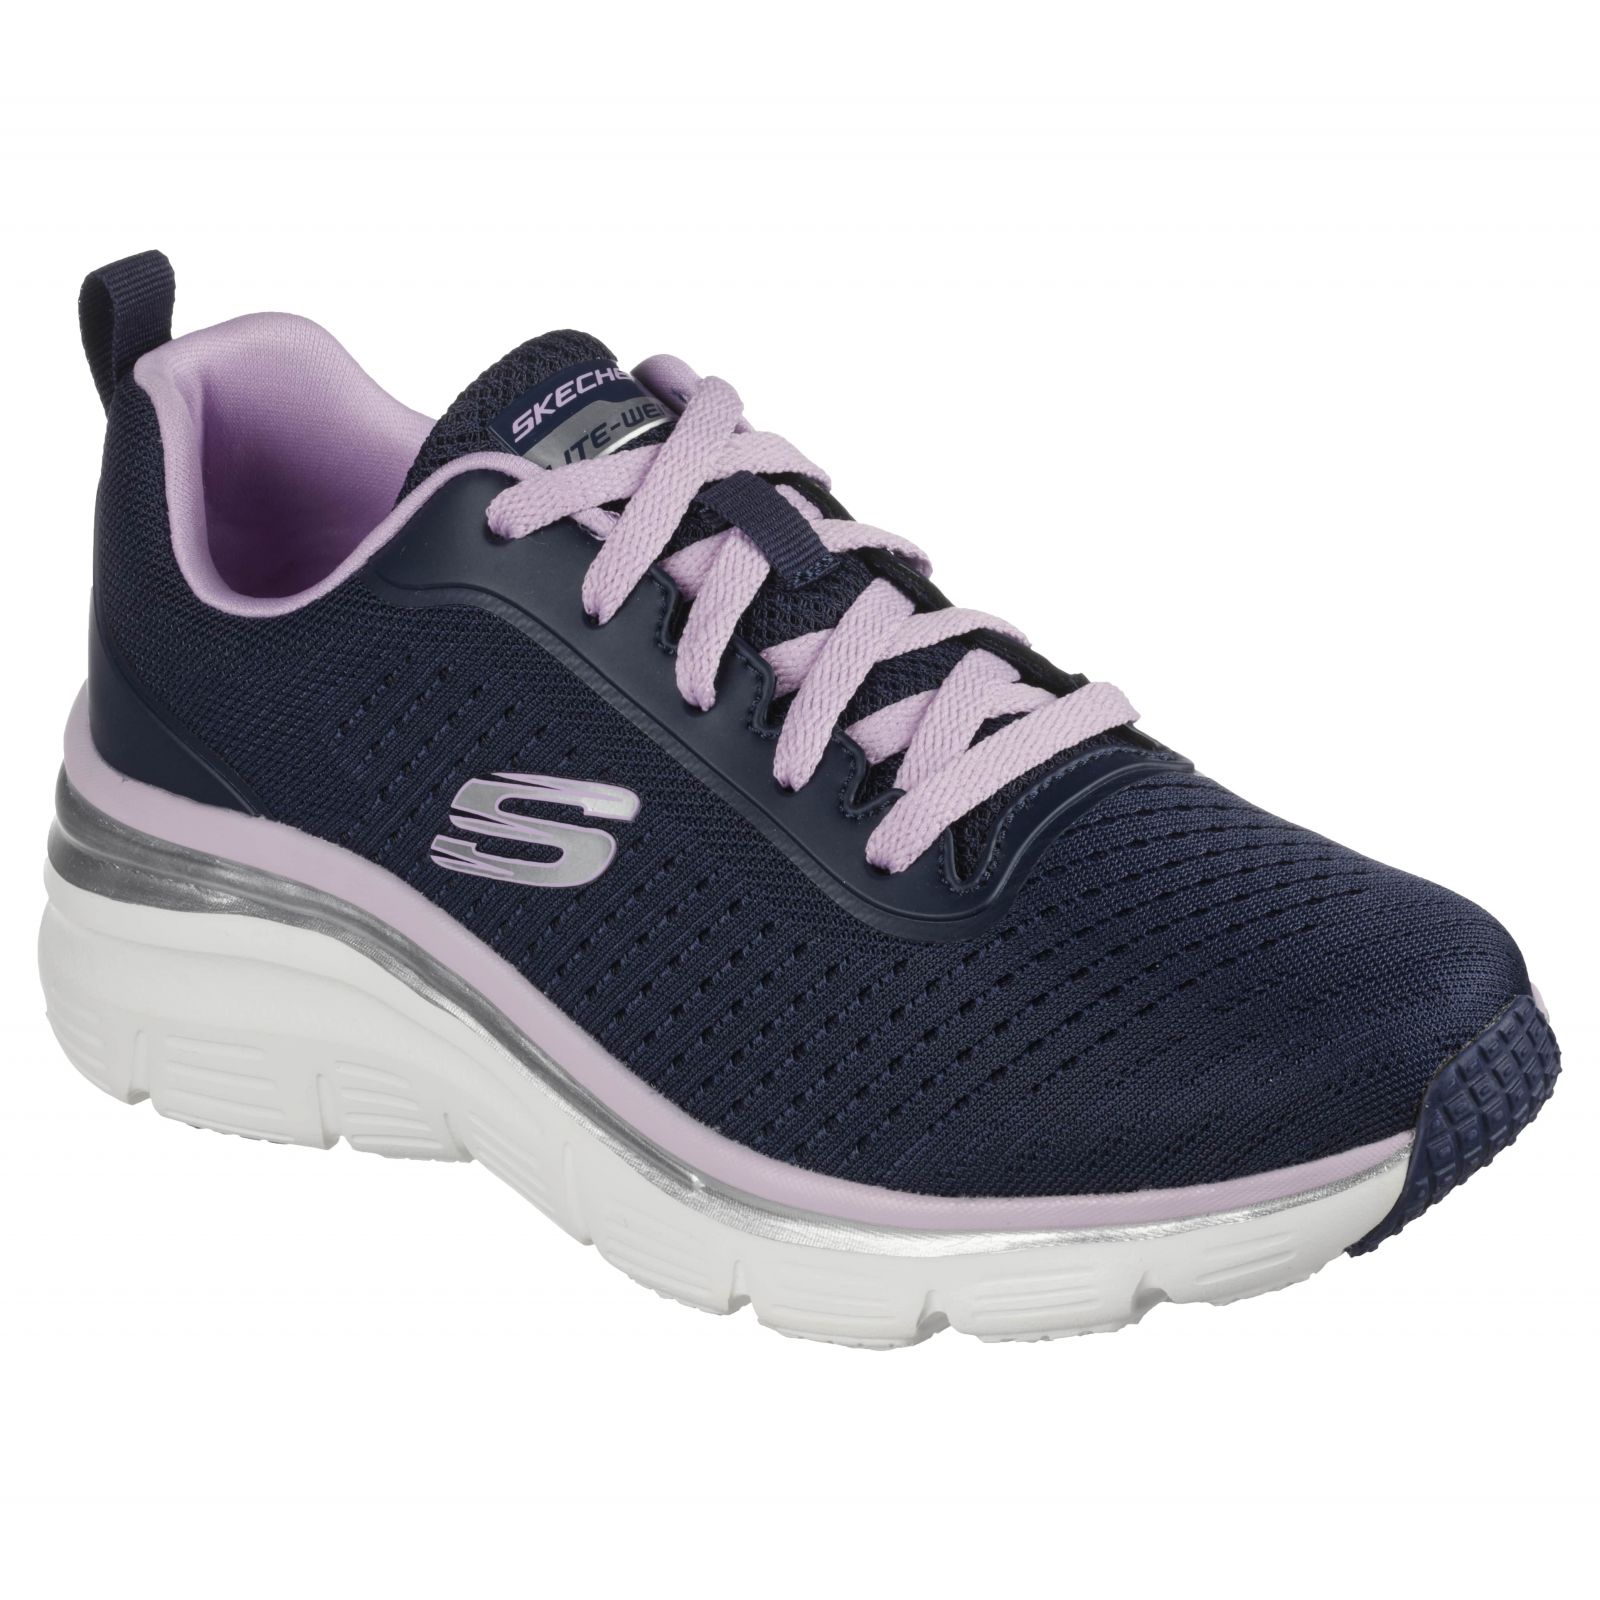 who makes skechers shoes